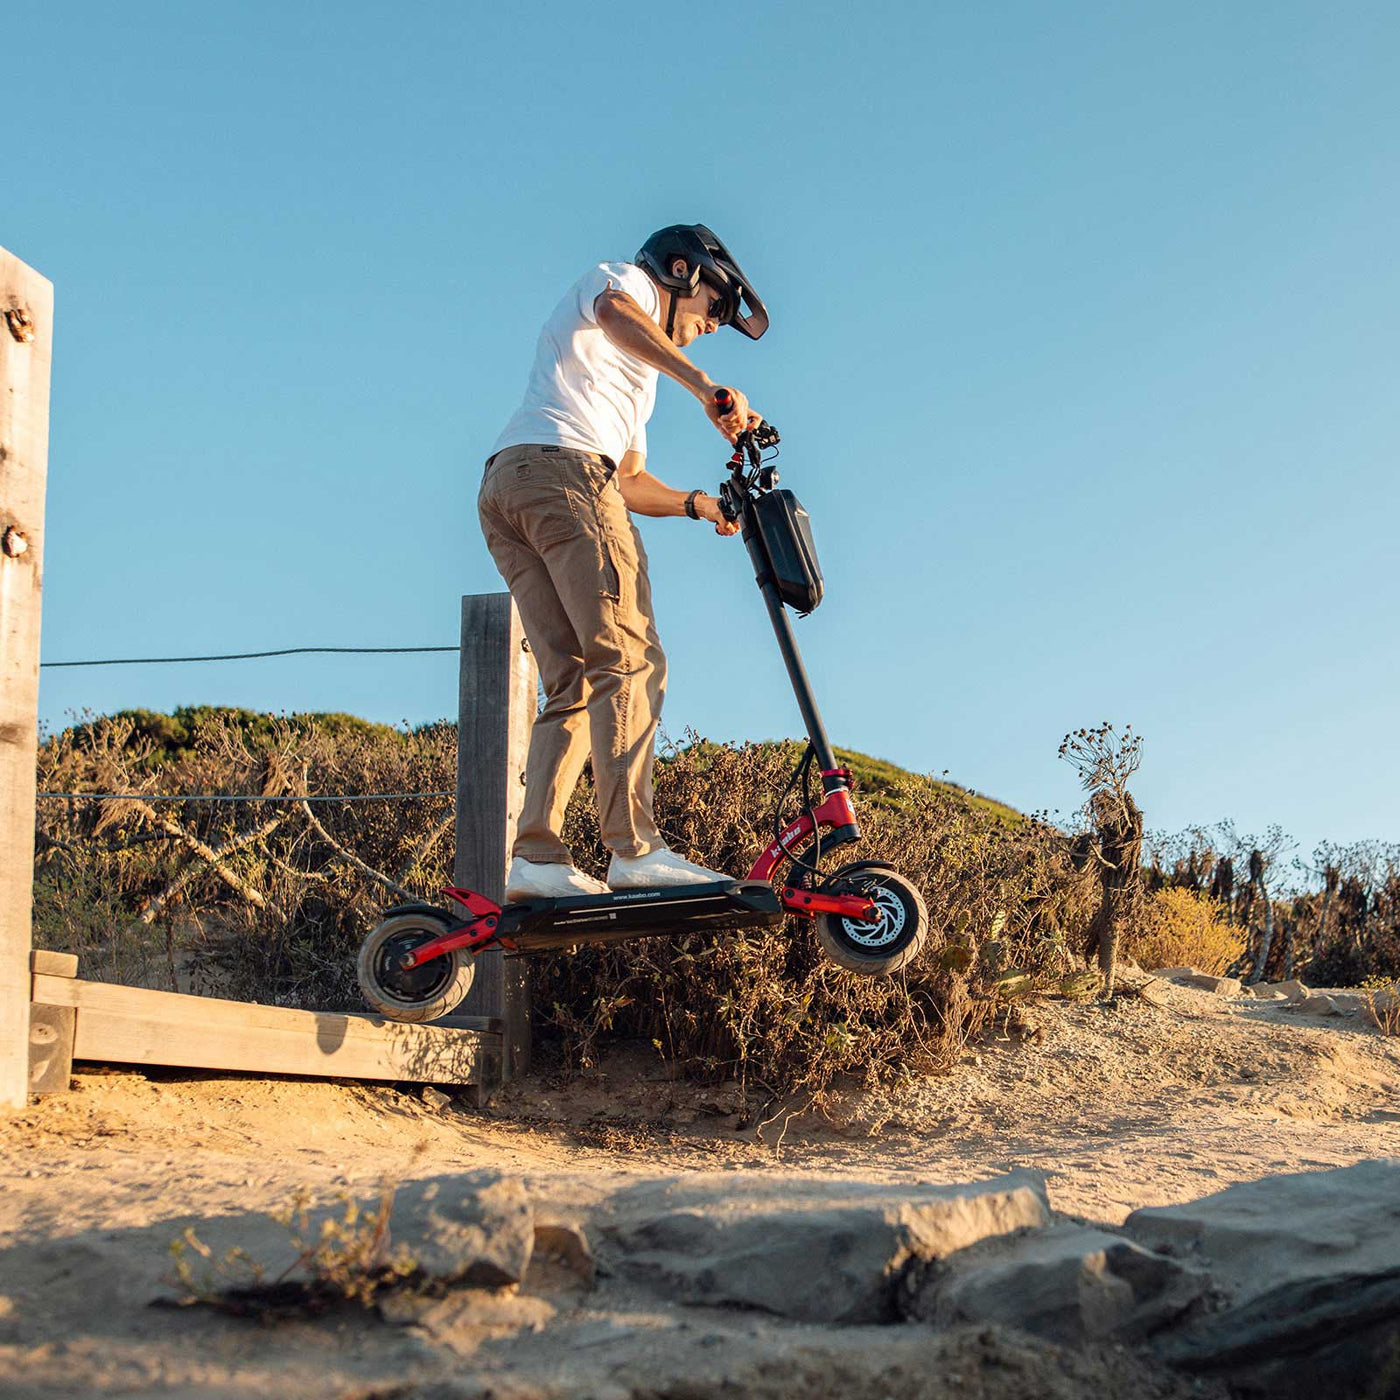 Kaabo USA Mantis 10 Lite Electric Scooter handling off-road terrain